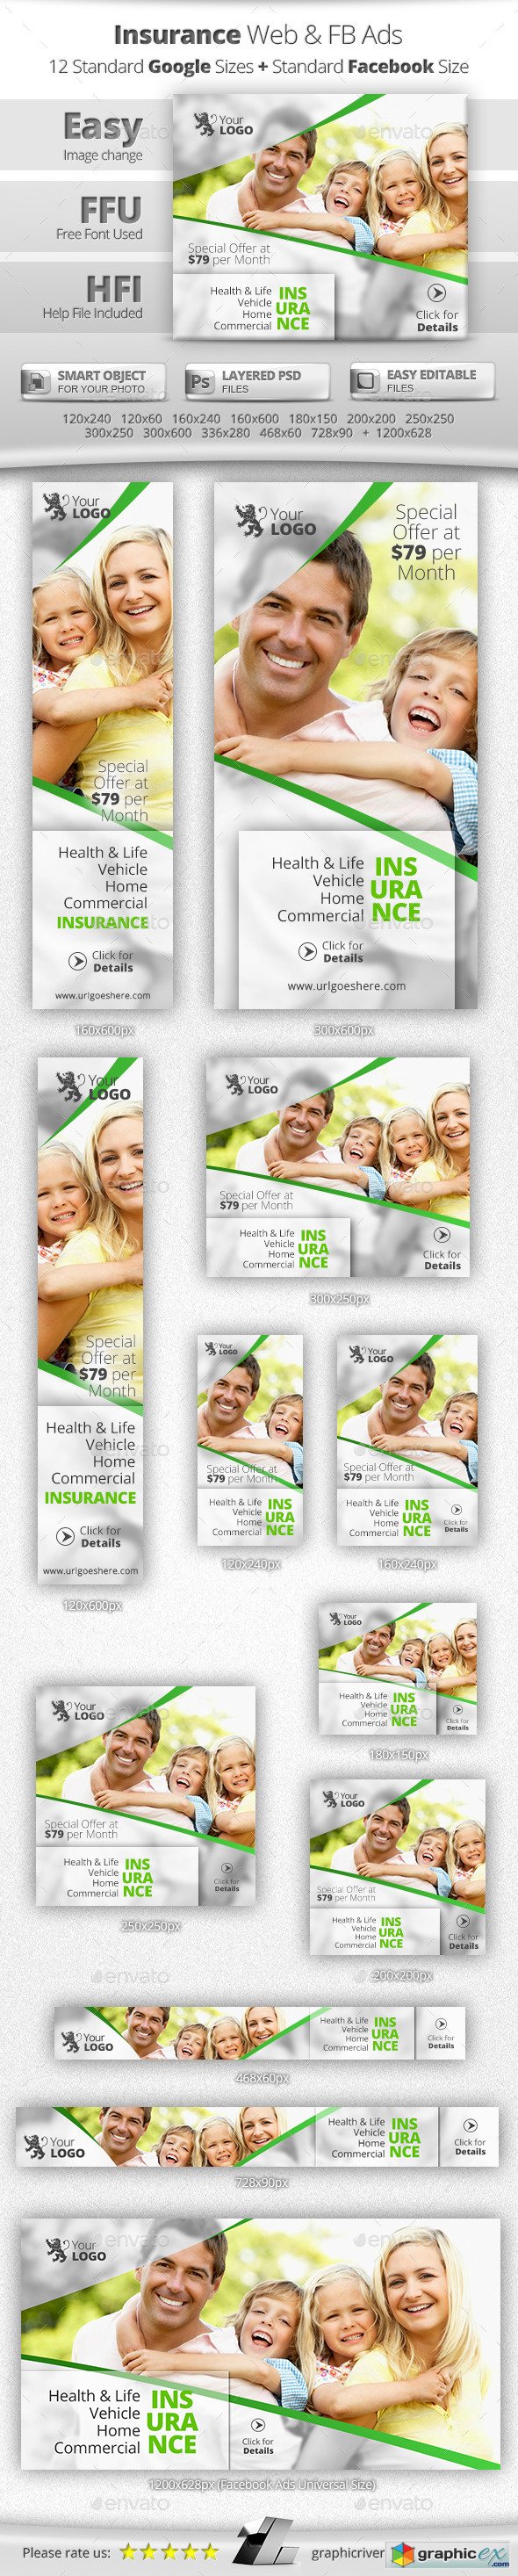 Insurance Web & Facebook Banners Ads